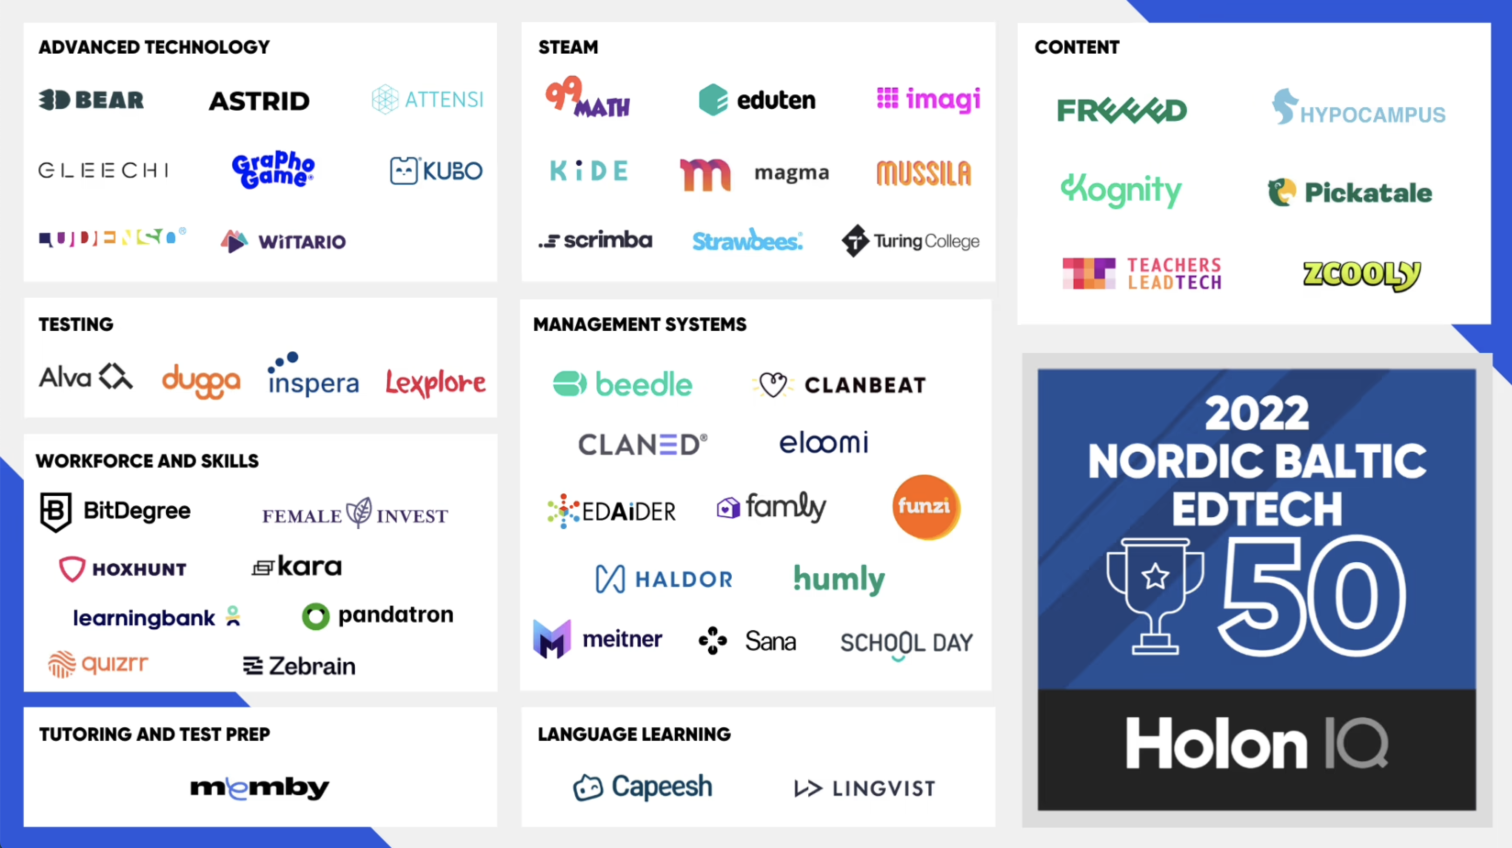 Zebrain is listed on the 2022 Nordic & Baltic EdTech Top 50